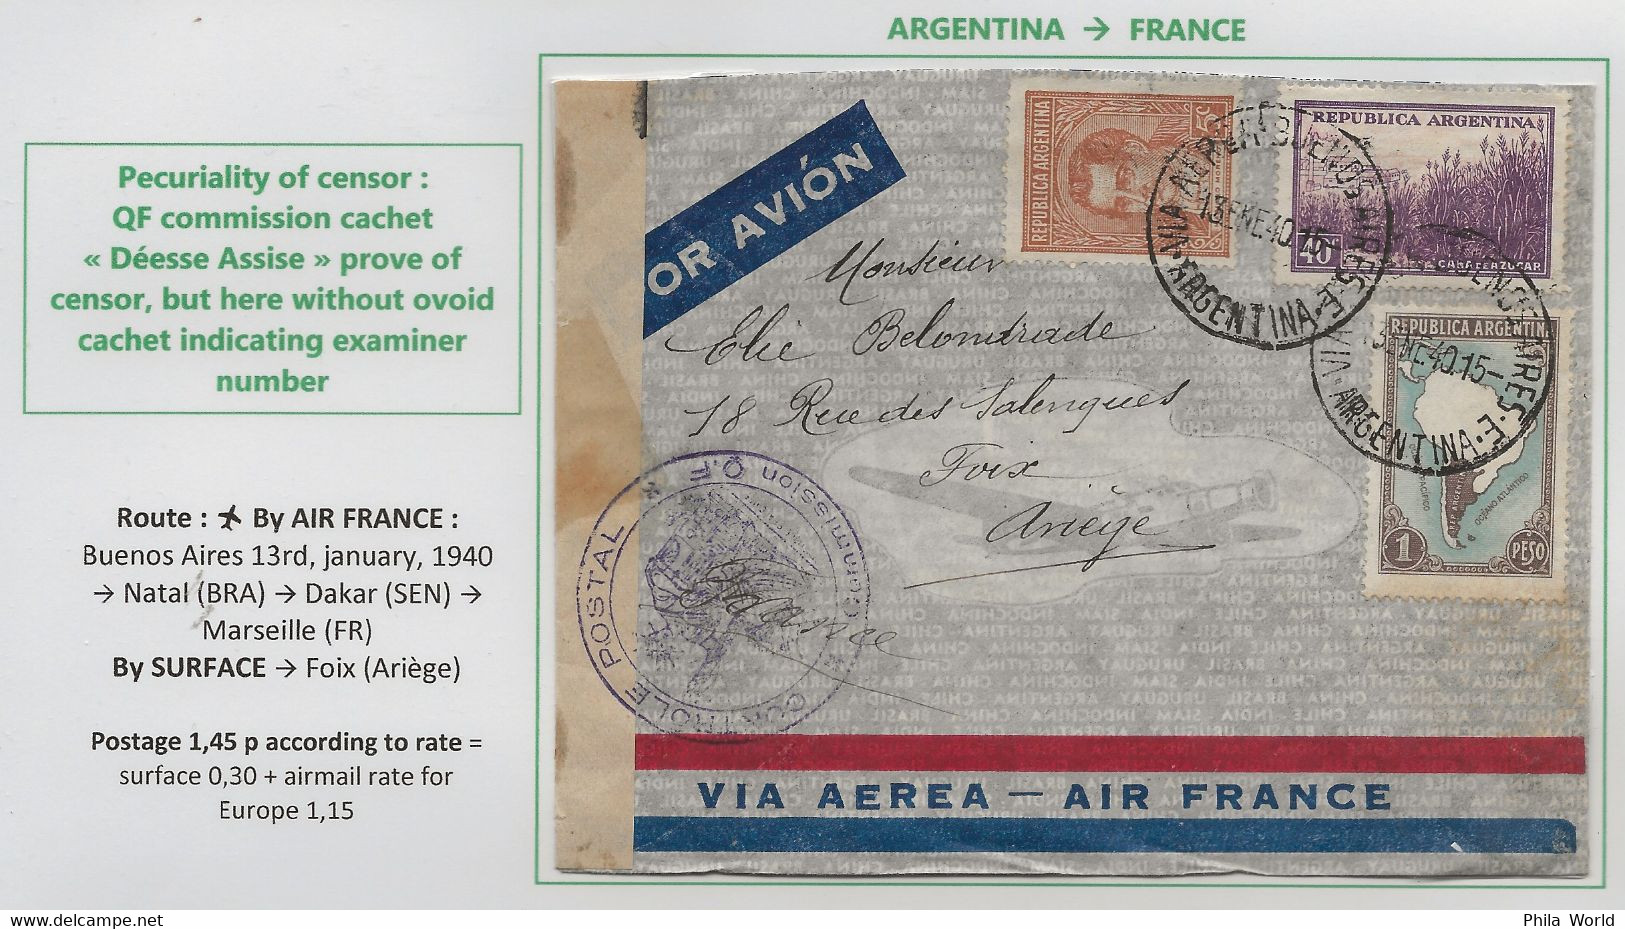 AIR FRANCE 1940 Argentina France Air Mail Cover QF Commission DEESSE ASSISE Without Ovoid Cachet Examiner Number - Lettres & Documents